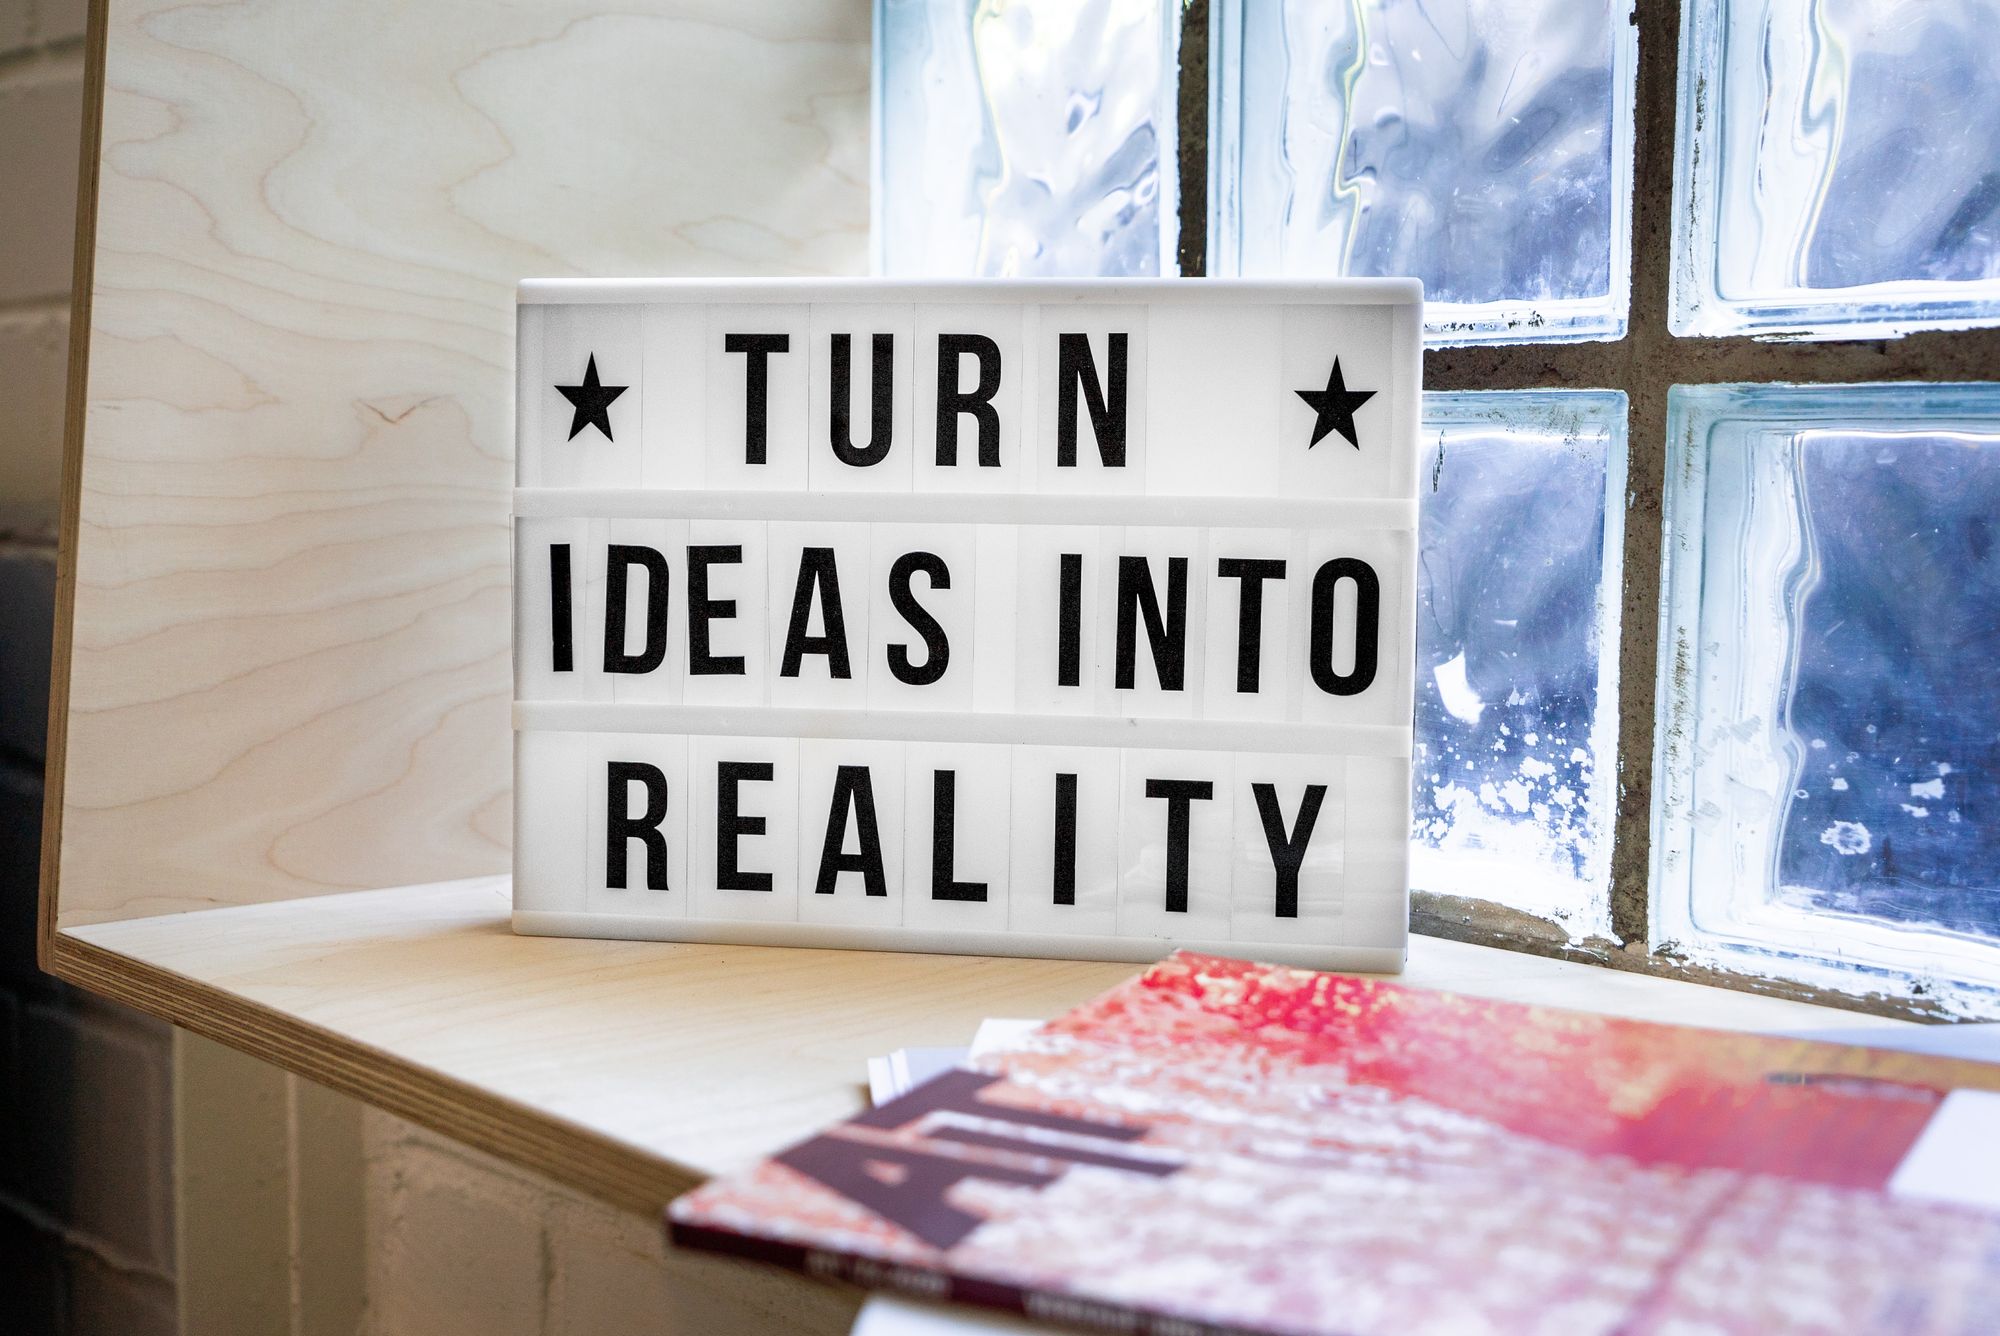 Image of a sign in a window that says 'Turn ideas into reality.'